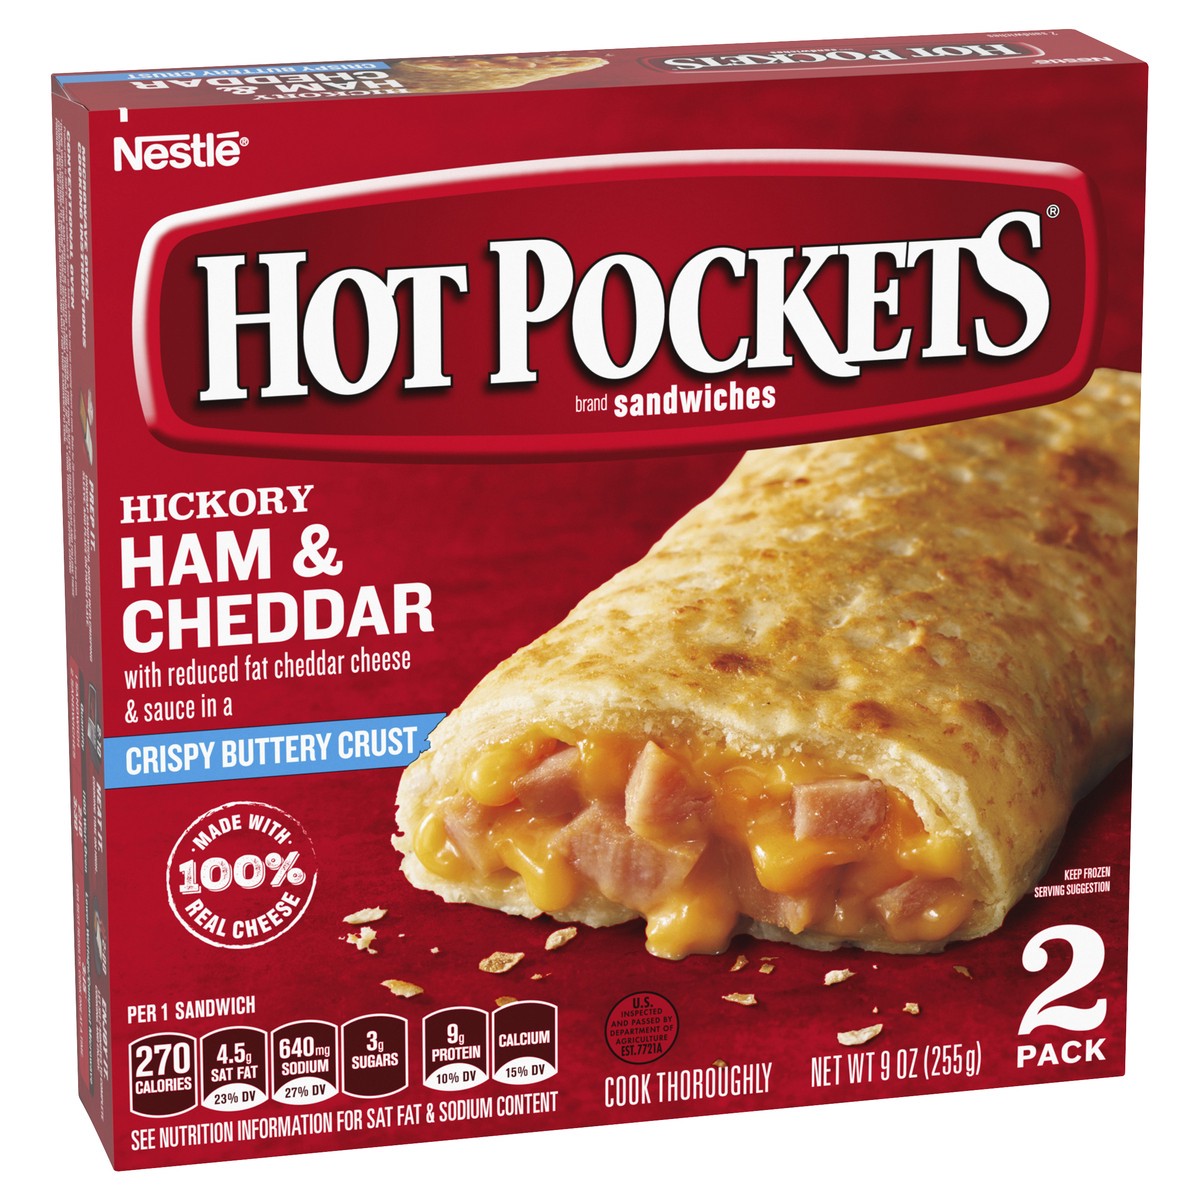 slide 2 of 8, Hot Pockets Hickory Ham & Cheddar Frozen Snacks in a Crispy Buttery Crust, Frozen Ham and Cheese Sandwiches Made with Real Reduced Fat Cheddar Cheese, 2 Count Frozen Sandwiches, 2 ct; 4.5 oz